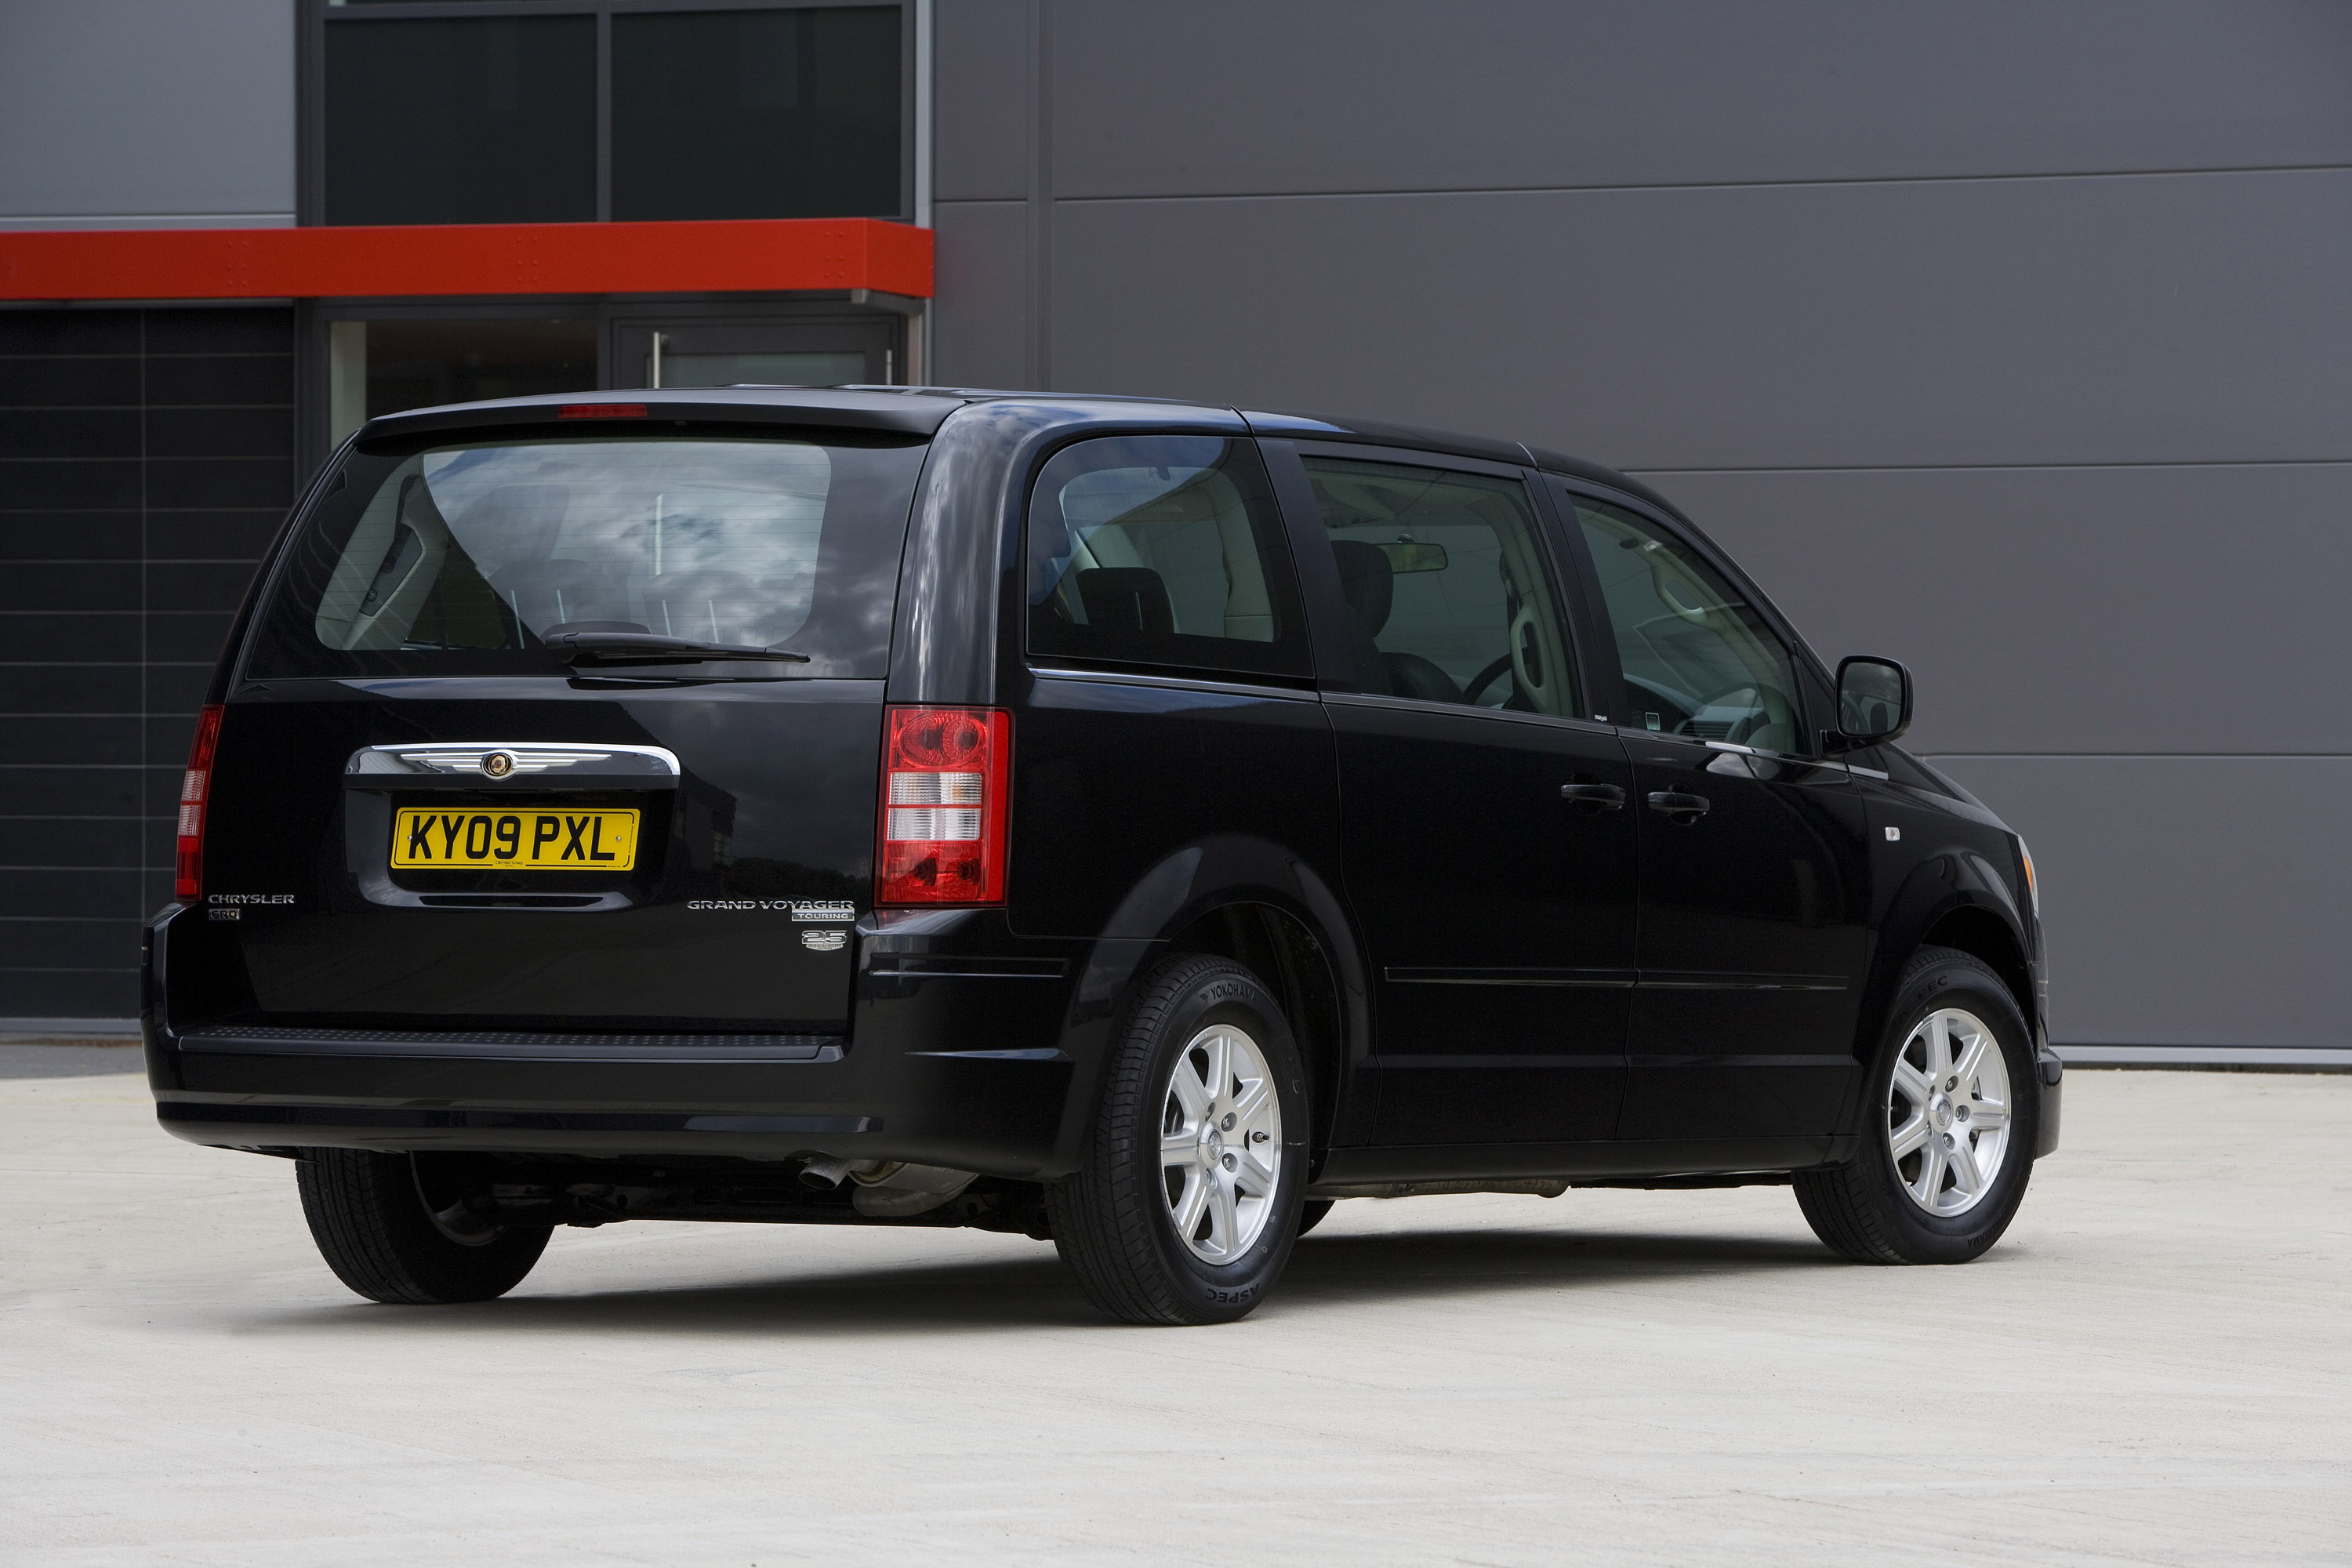 Chrysler Grand Voyager Special Edition